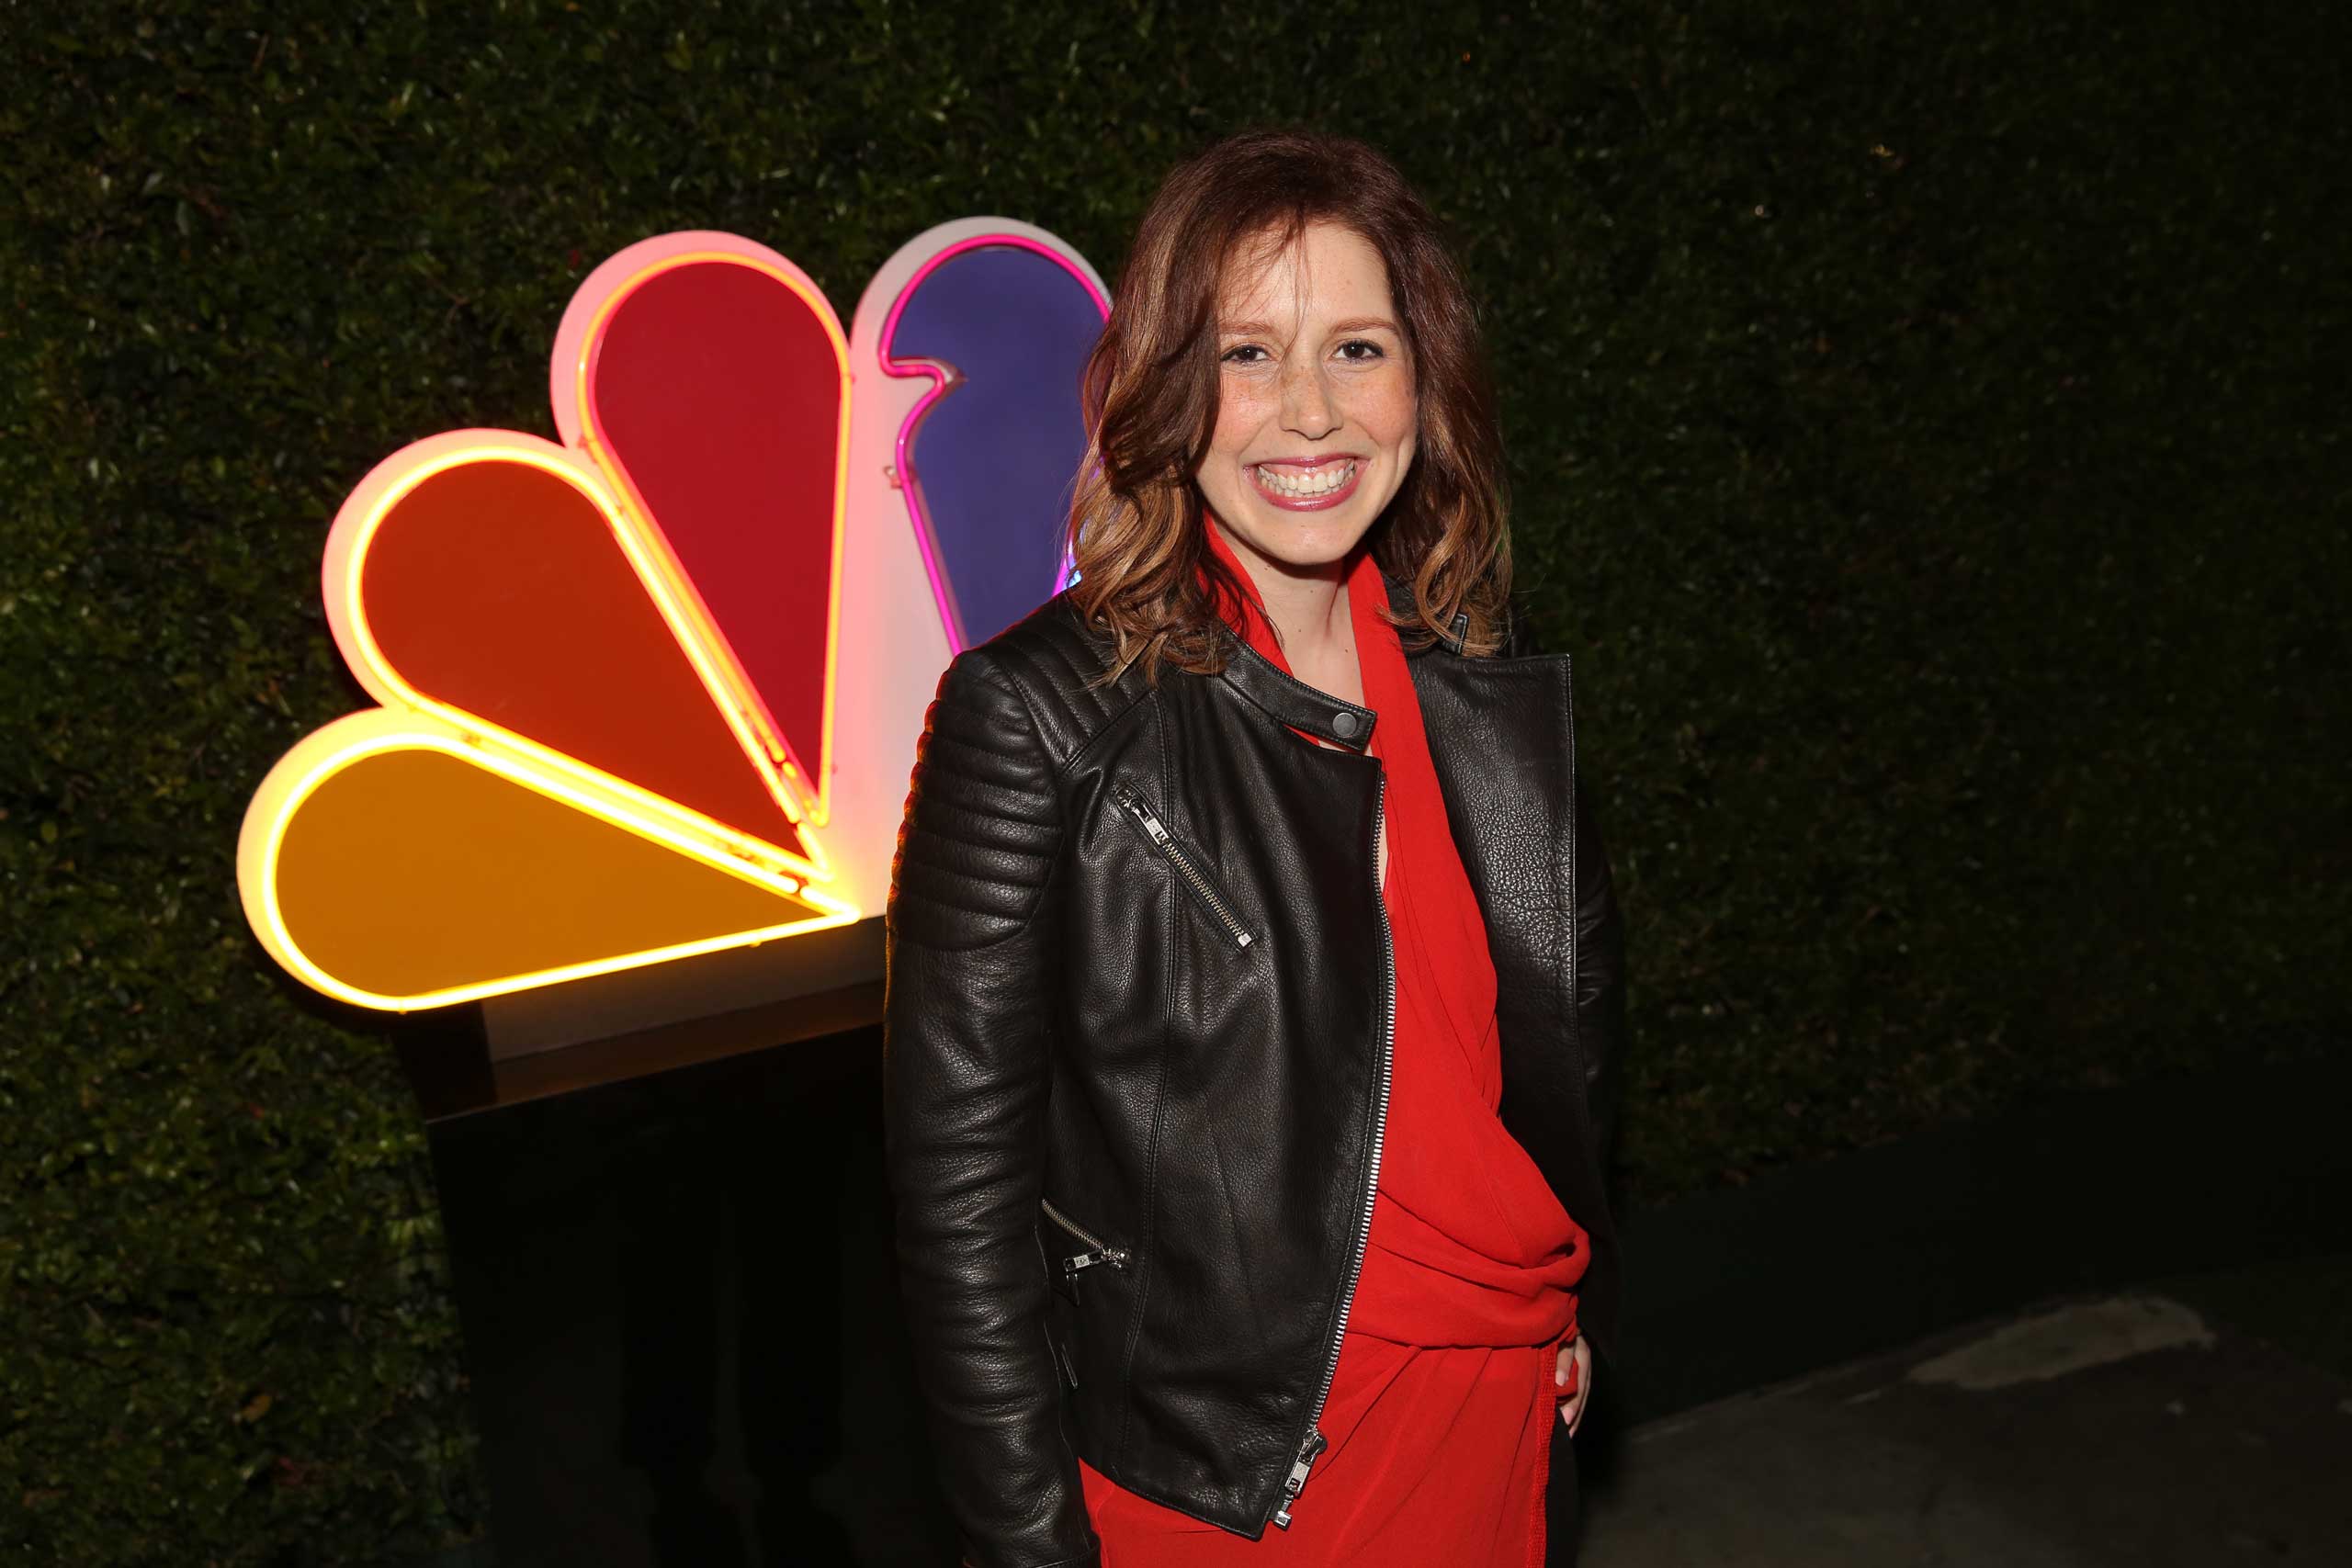 Vanessa Bayer, "Saturday Night Live" at Boa Steakhouse, West Hollywood, in 2014. (Chris Haston/NBC/NBCU Photo Bank/Getty Images)